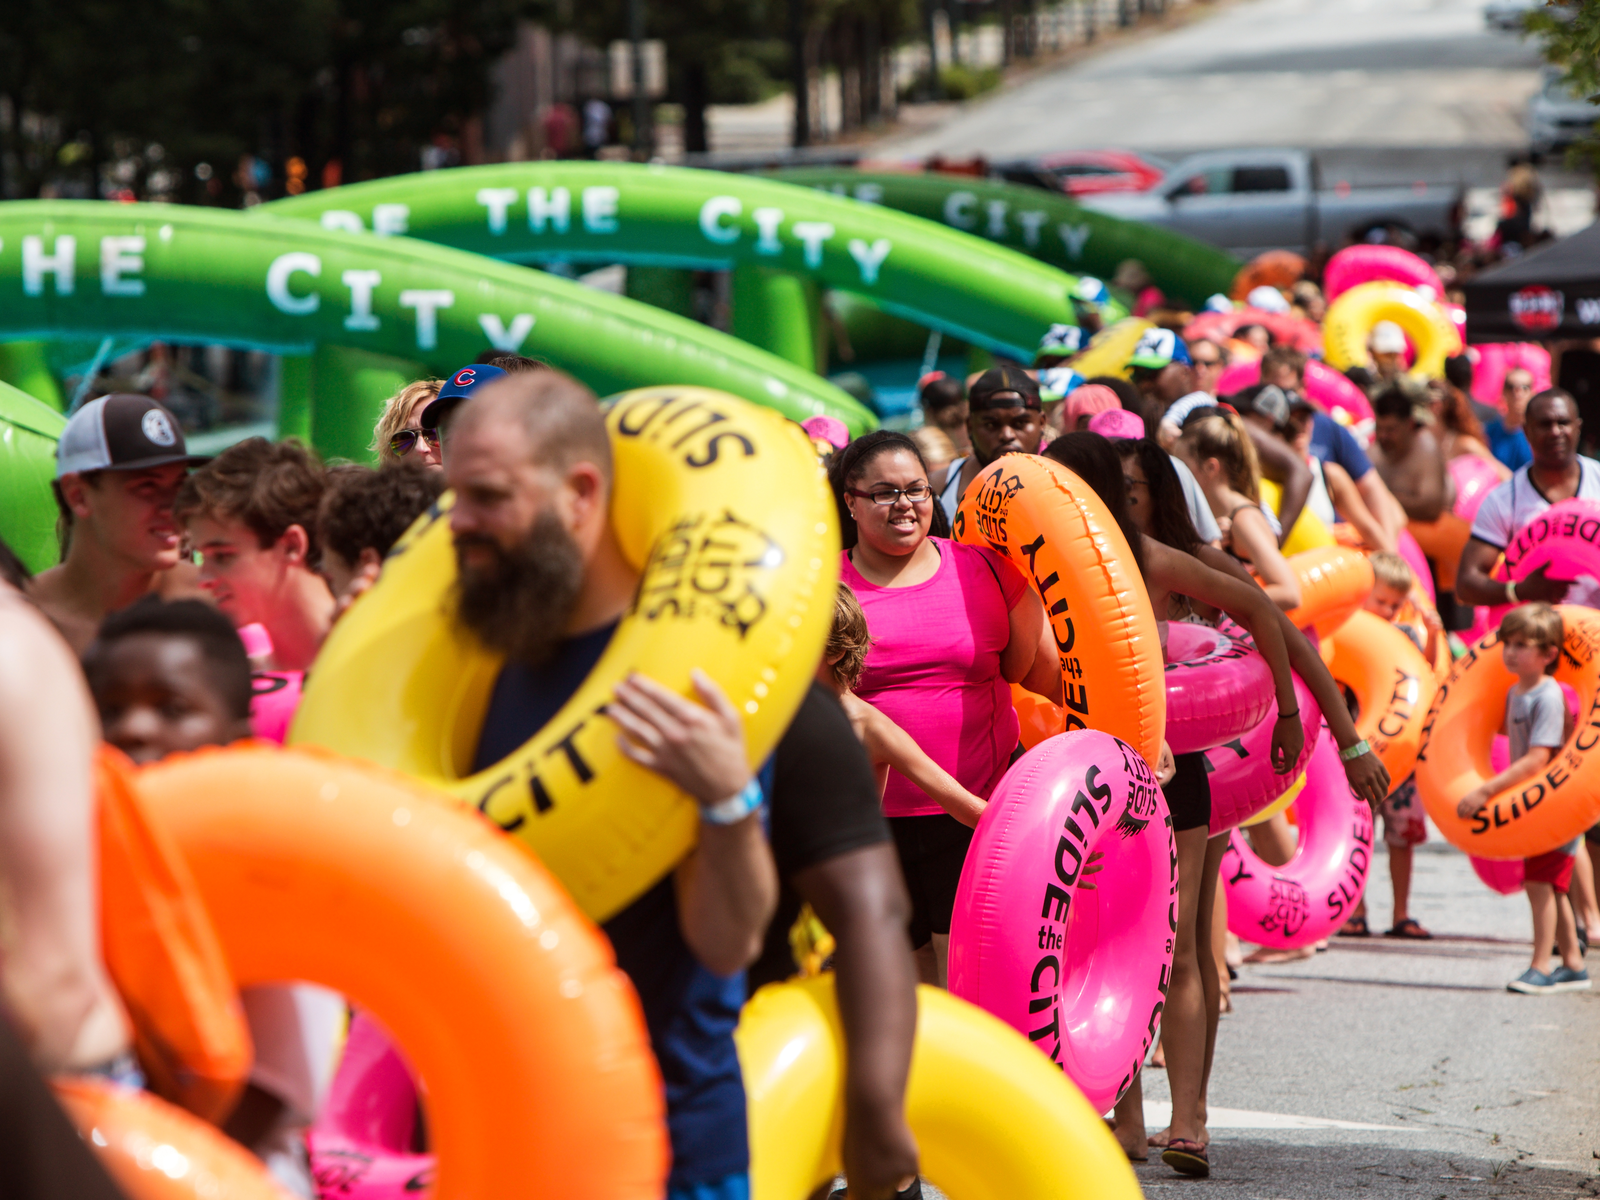 People in their swim shirts carrying swim rings as they get in line at Slide the City in Downtown Atlanta, one of the best water parks in the USA